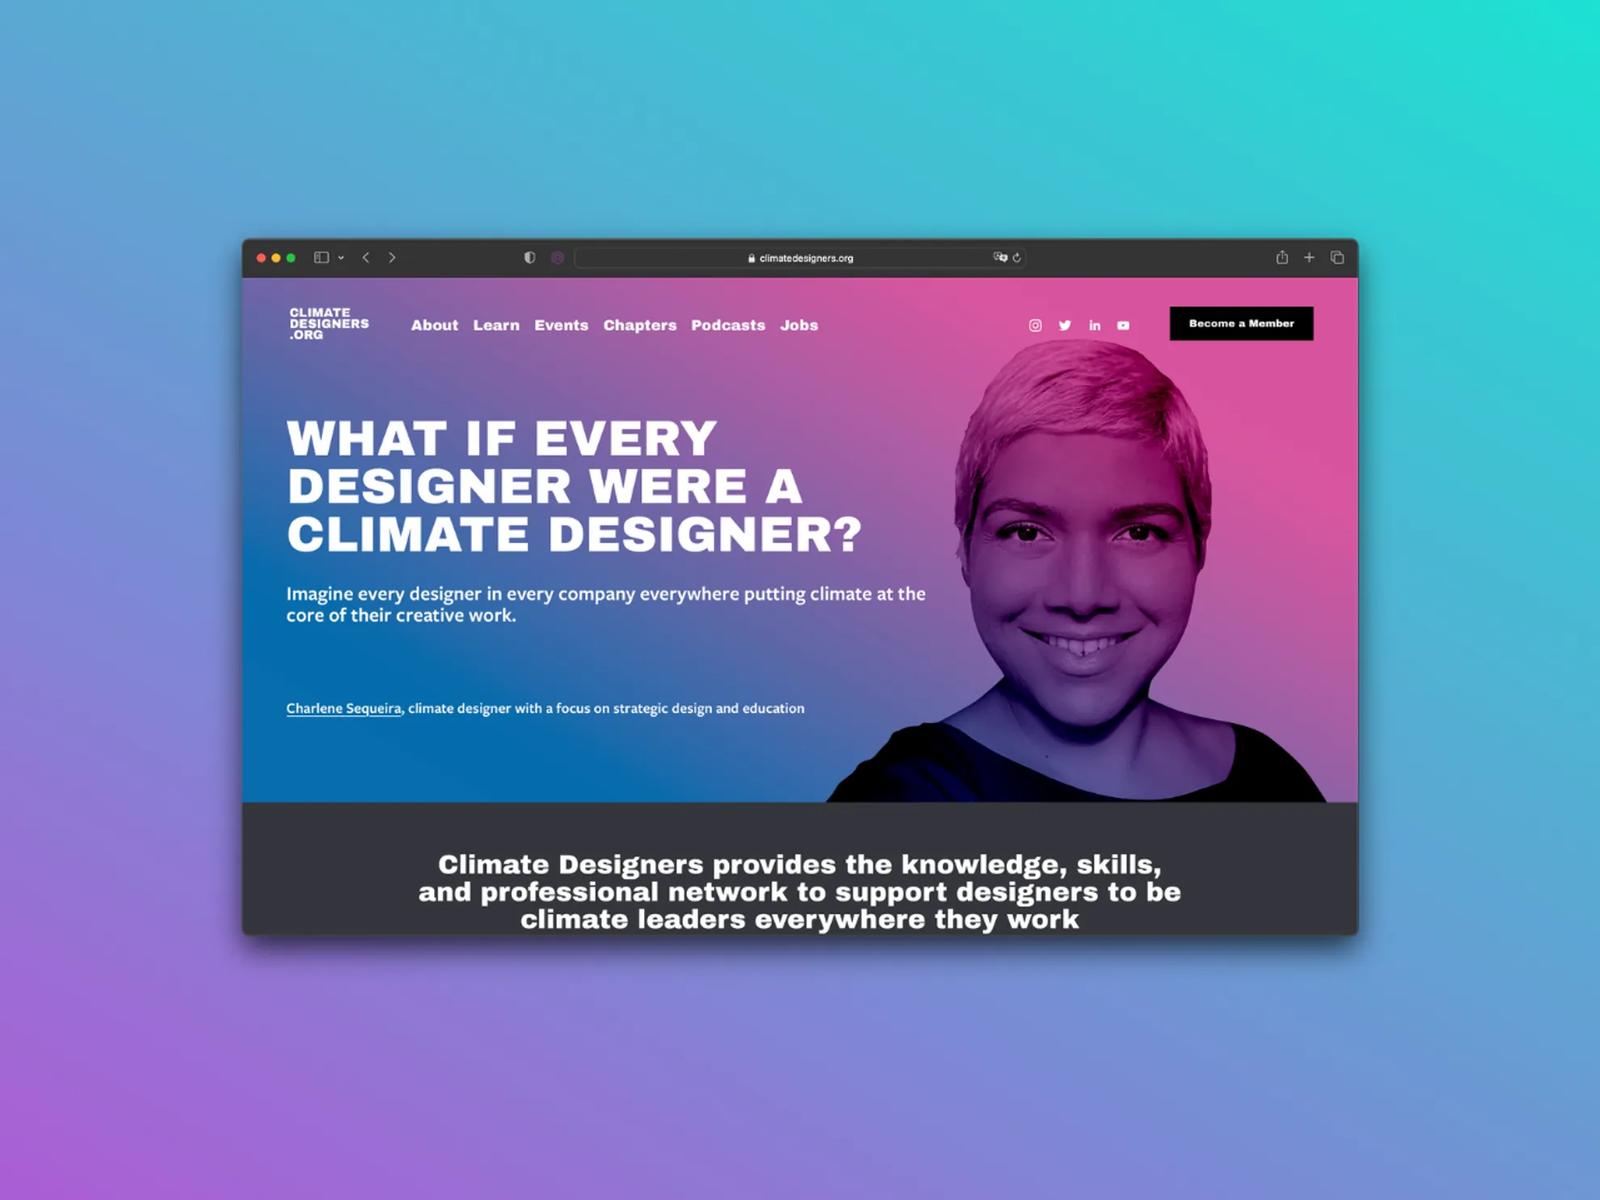 A global community for designers to become climate leaders